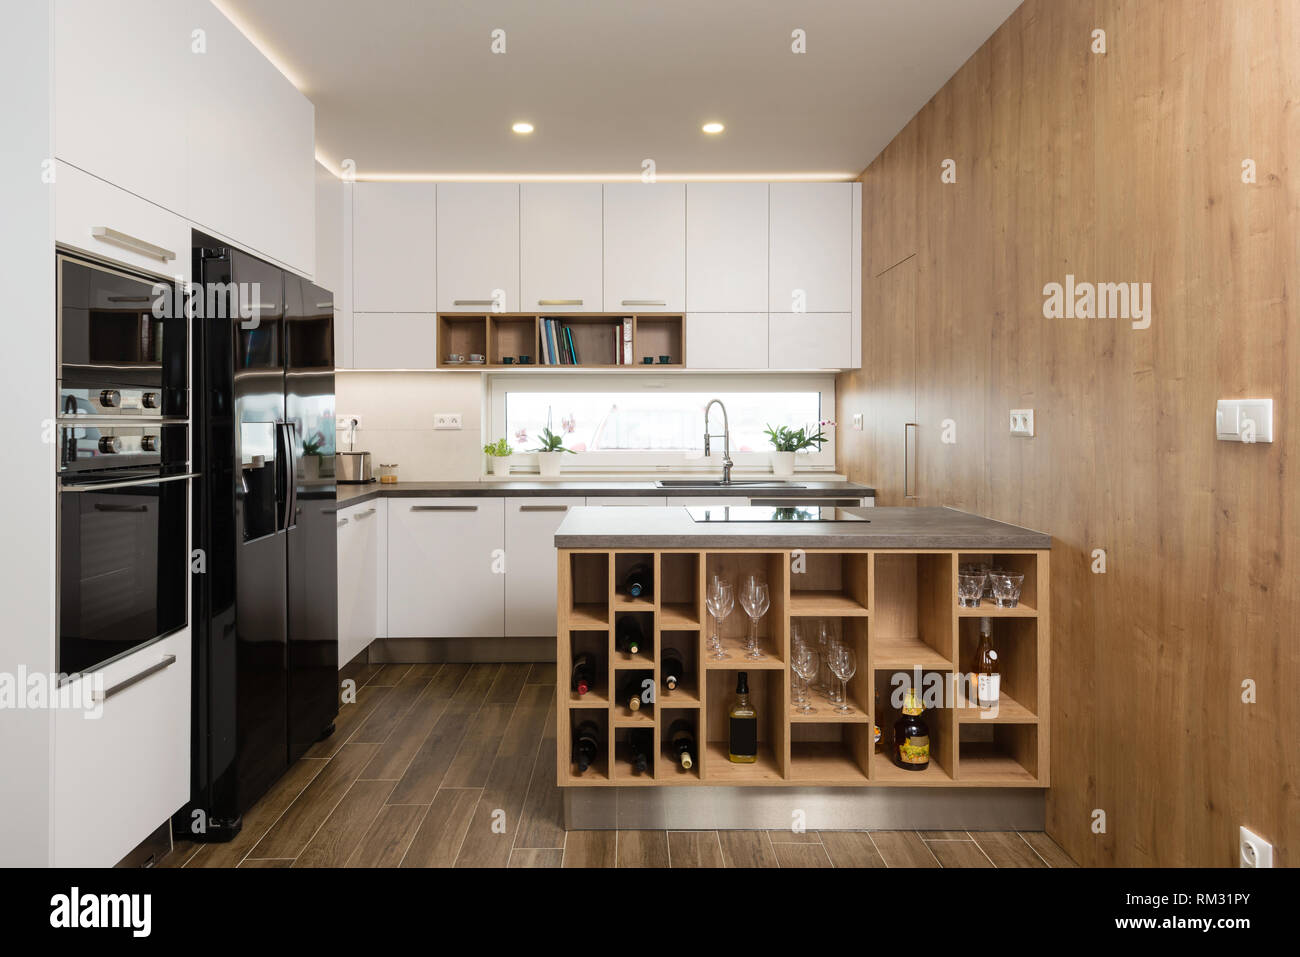 https://c8.alamy.com/comp/RM31PY/interior-of-modern-kitchen-with-built-in-appliances-RM31PY.jpg